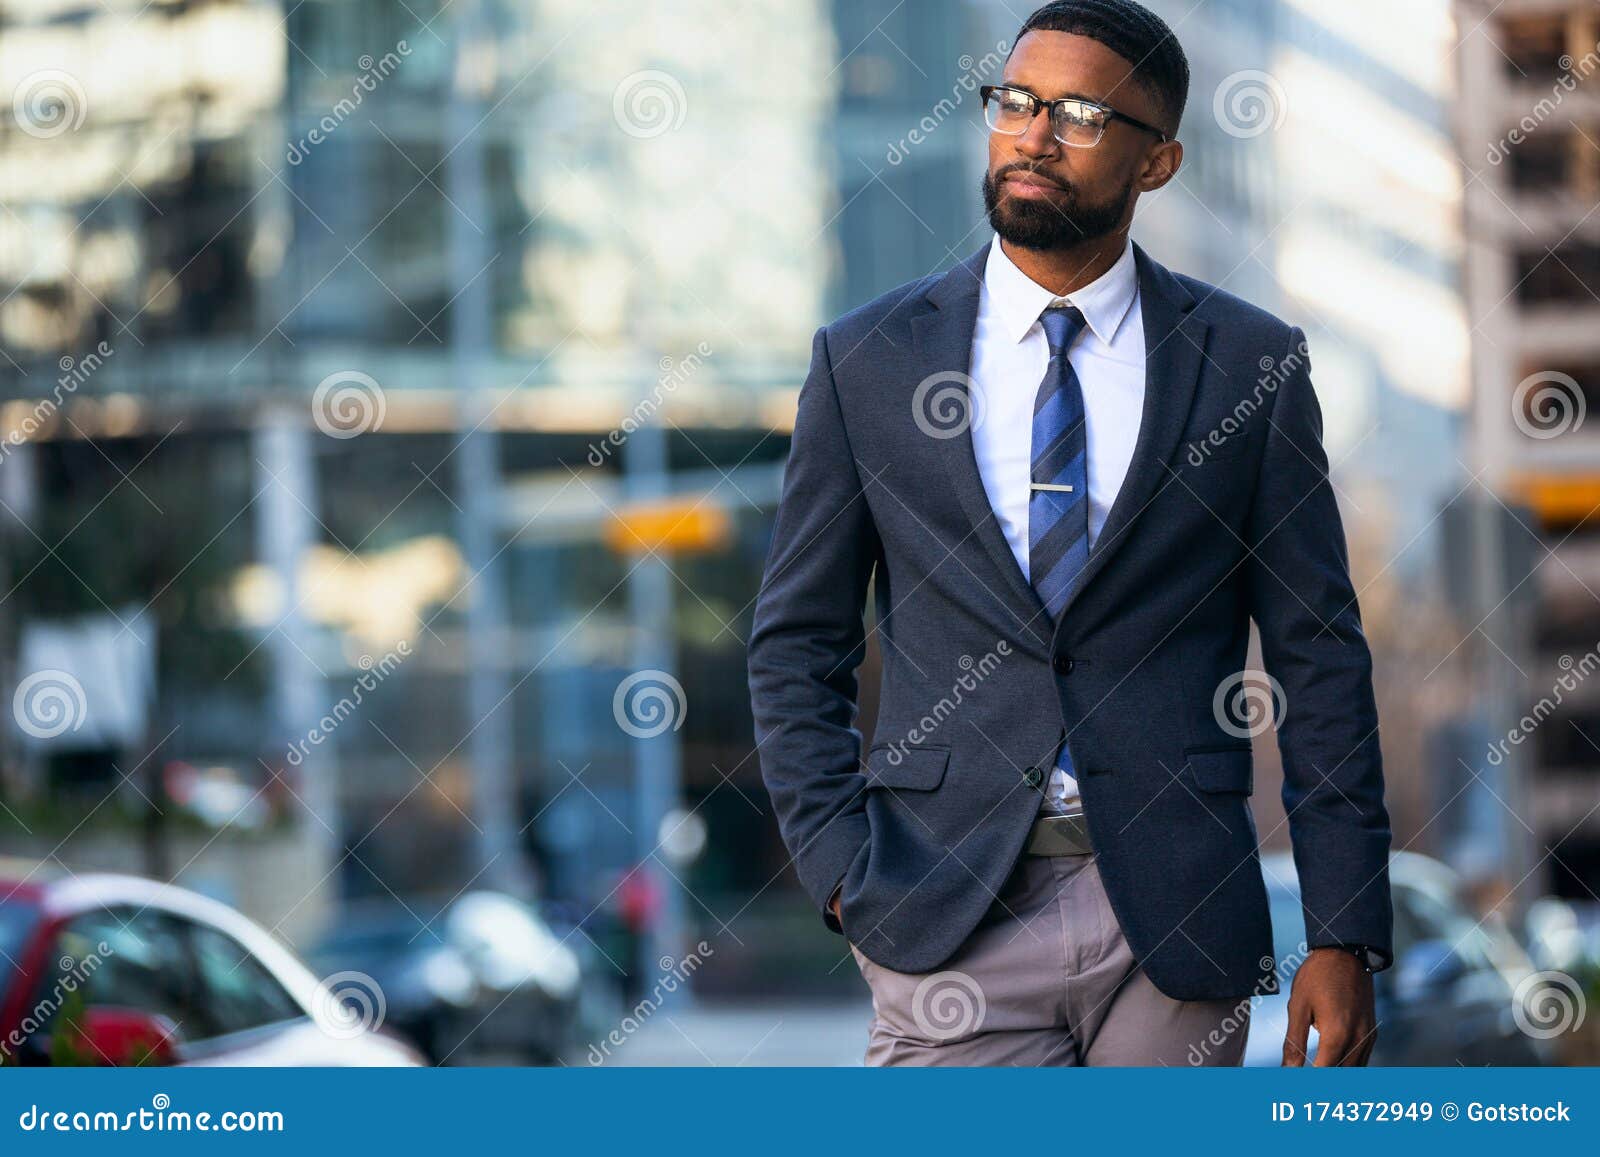 Attractive Mixed Ethnicity Multiethnic Business Man in Modern Suit ...